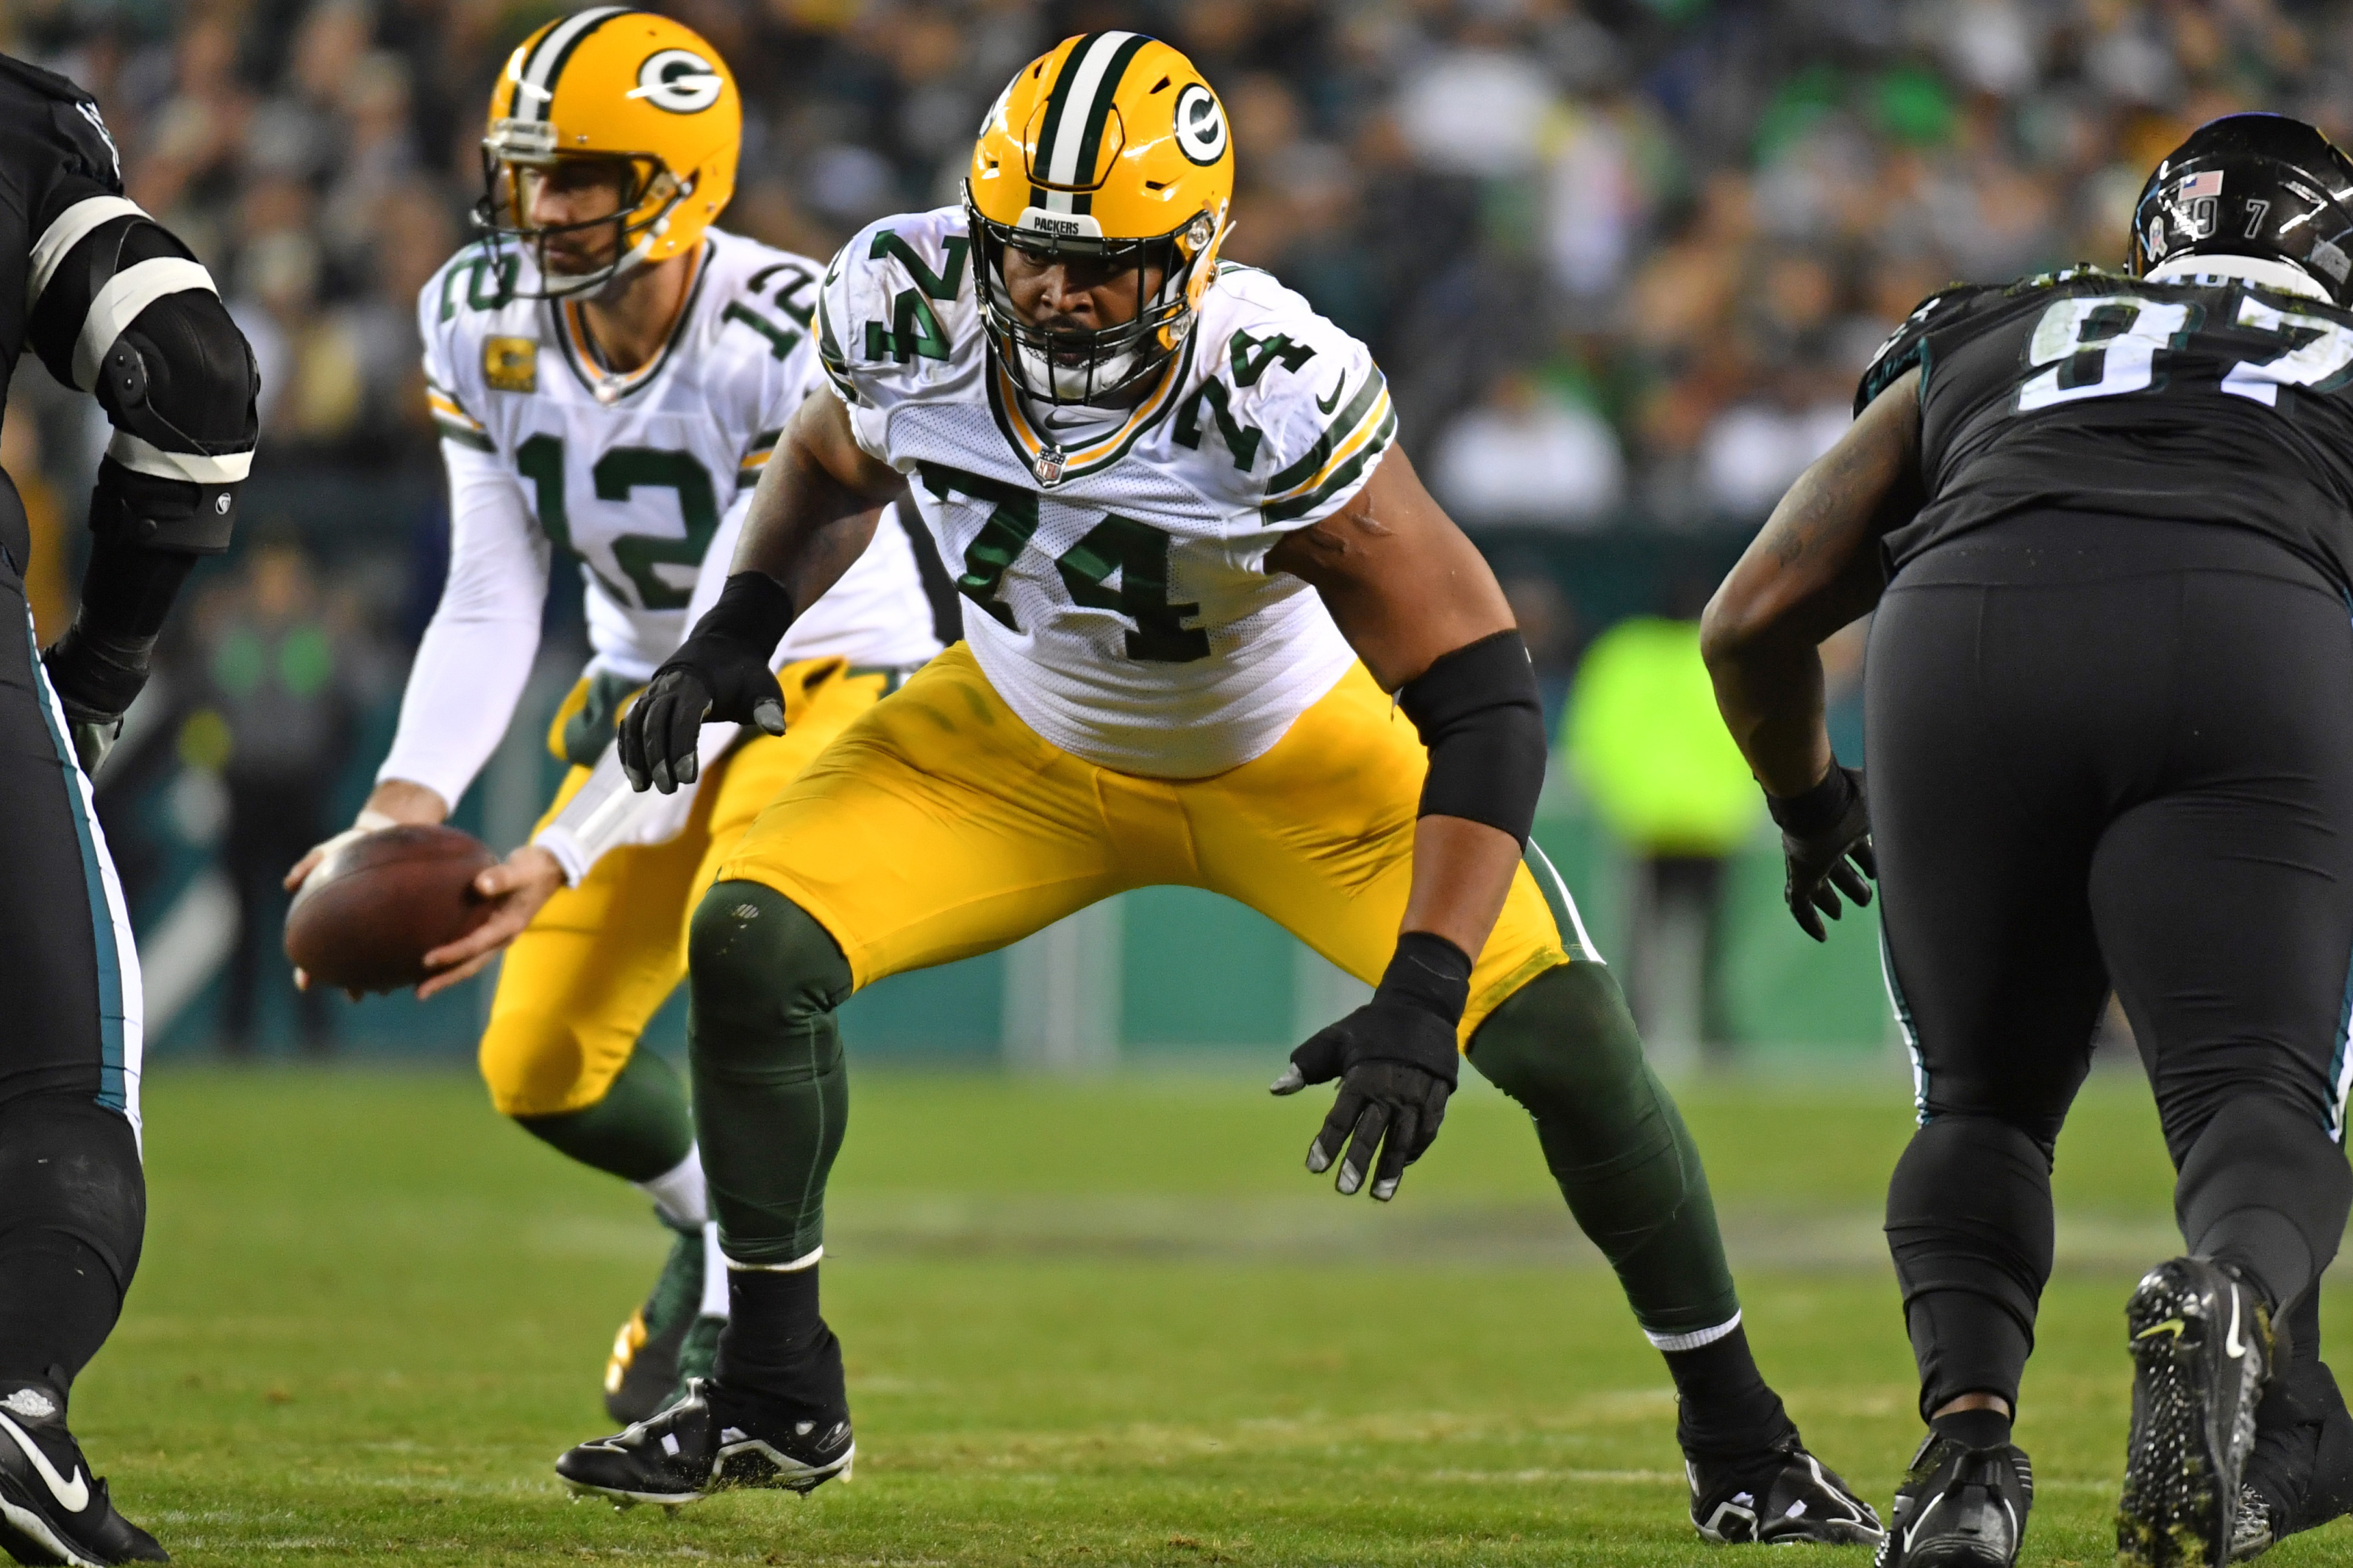 Packers dominant offensive line sparks improved play on offense